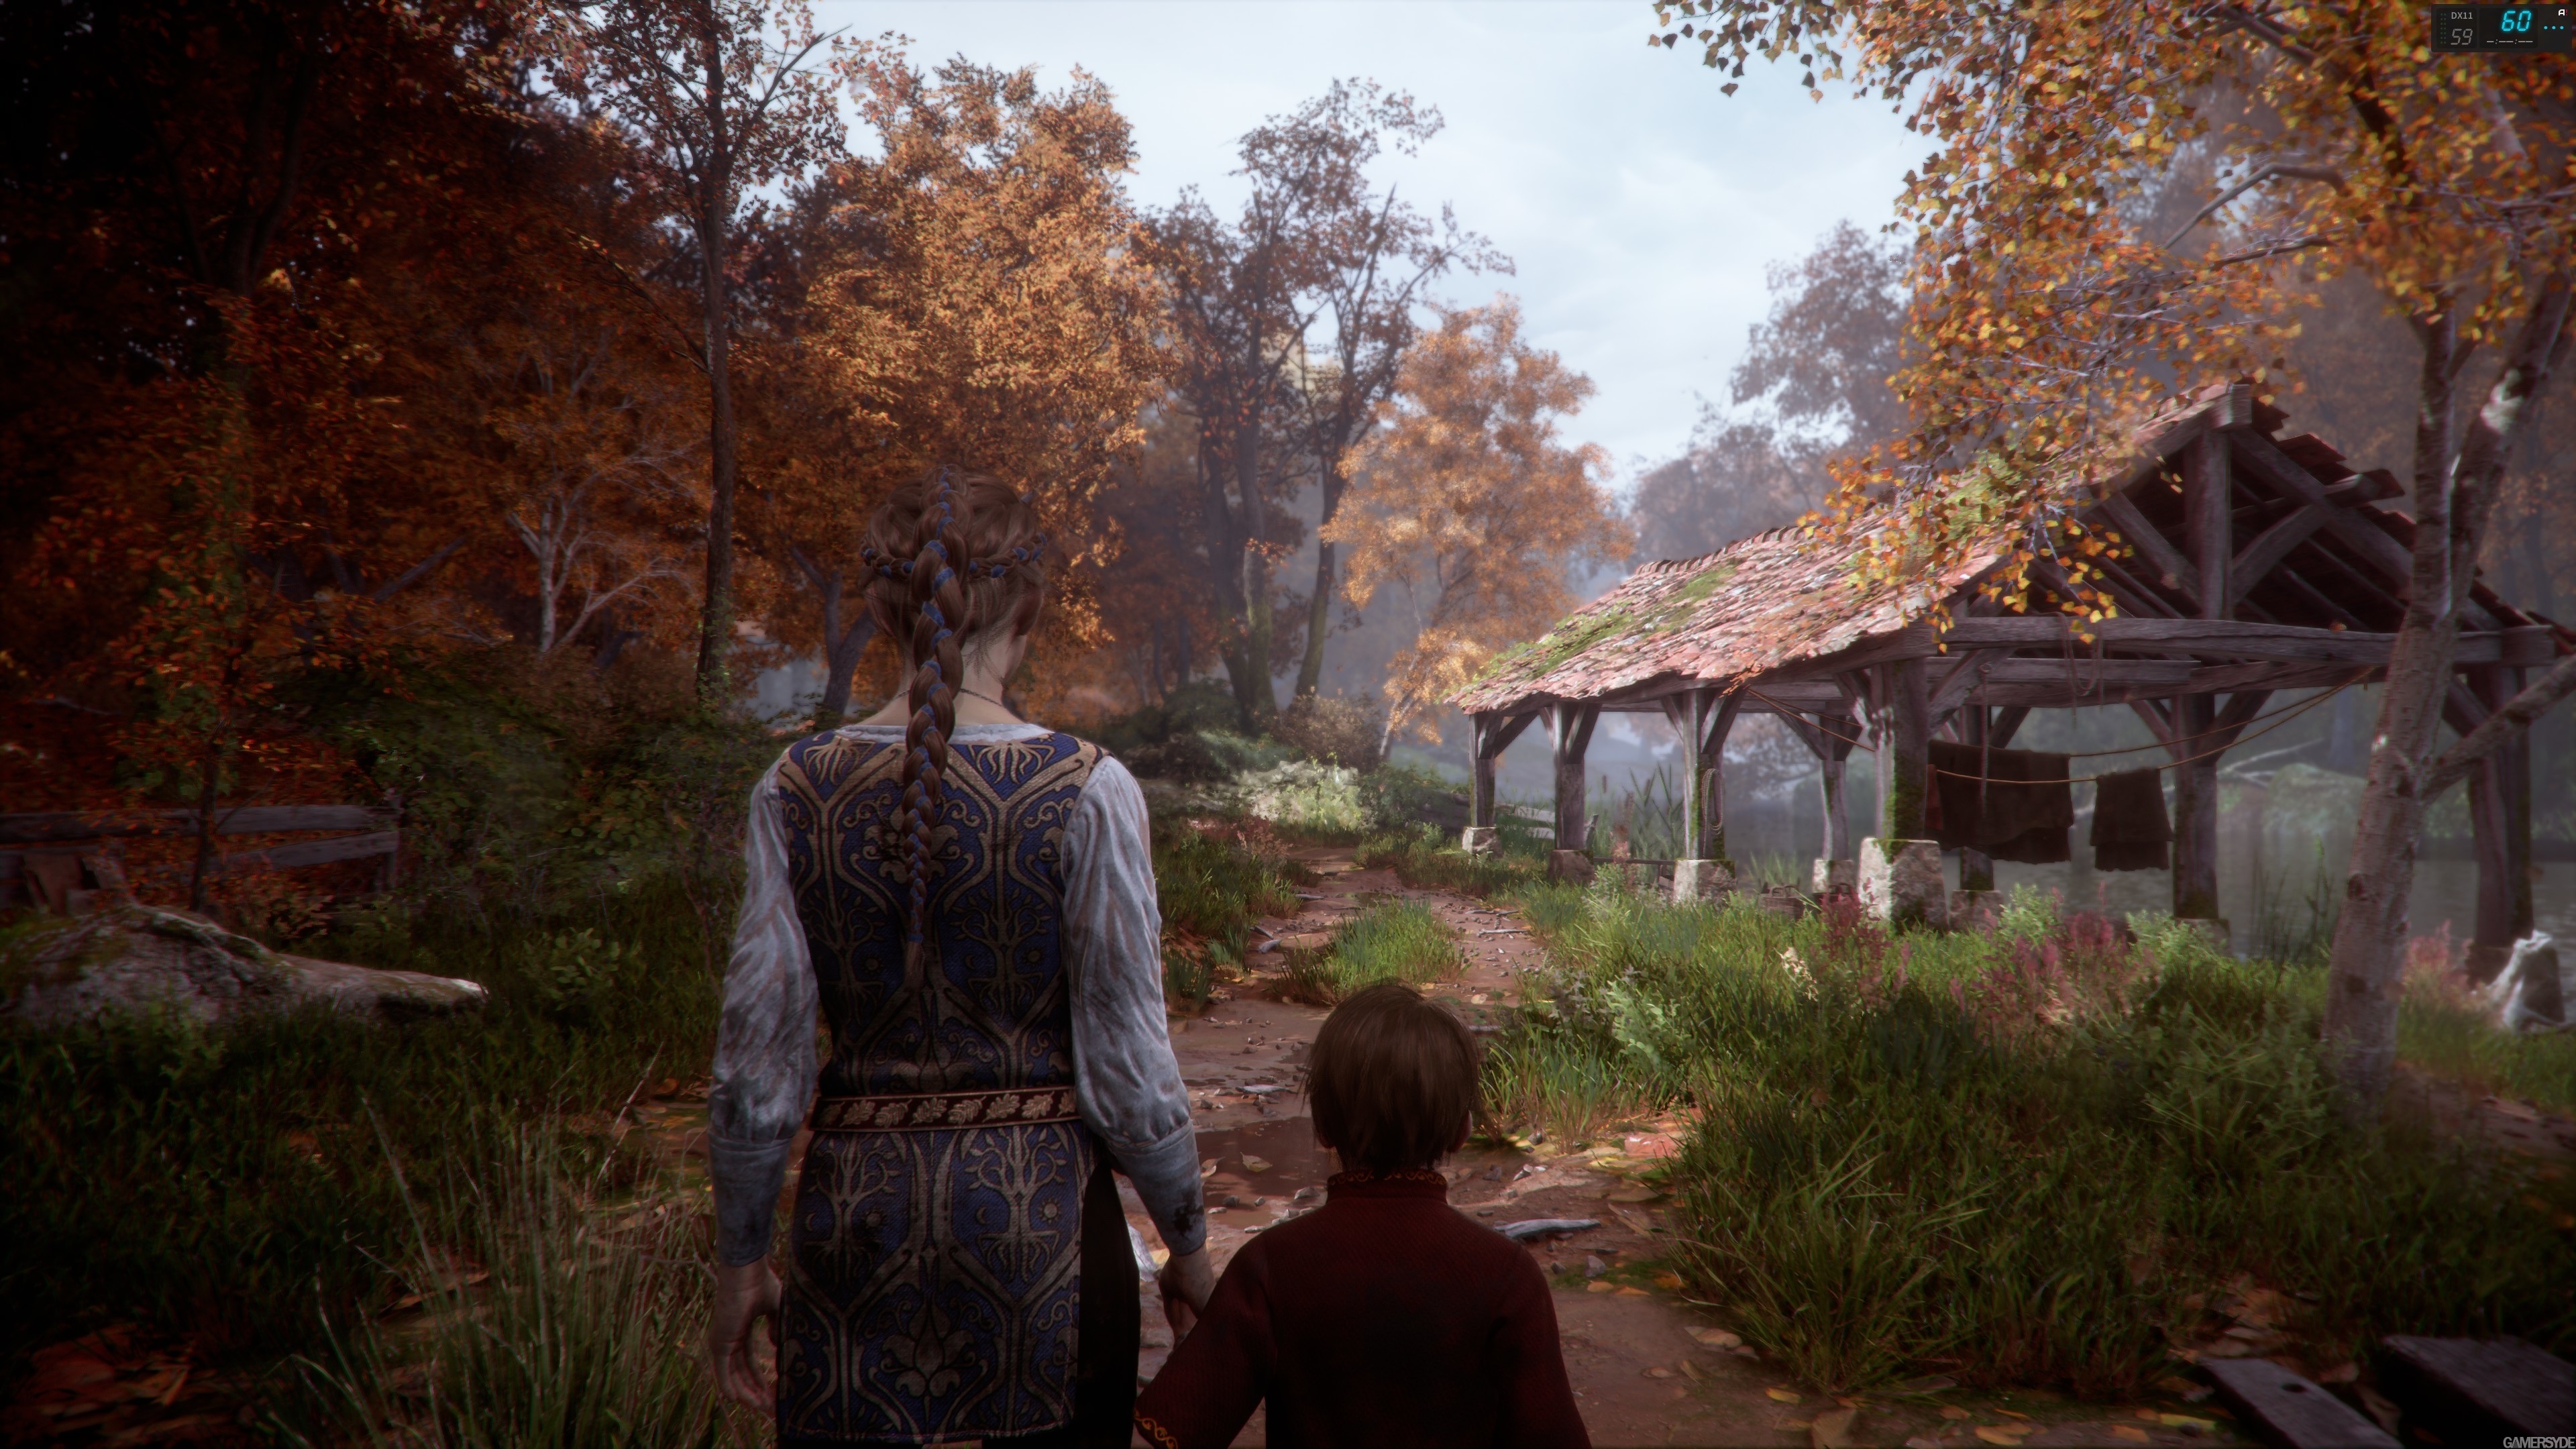 gamingladies — thewolfkissed: A Plague Tale: Innocence